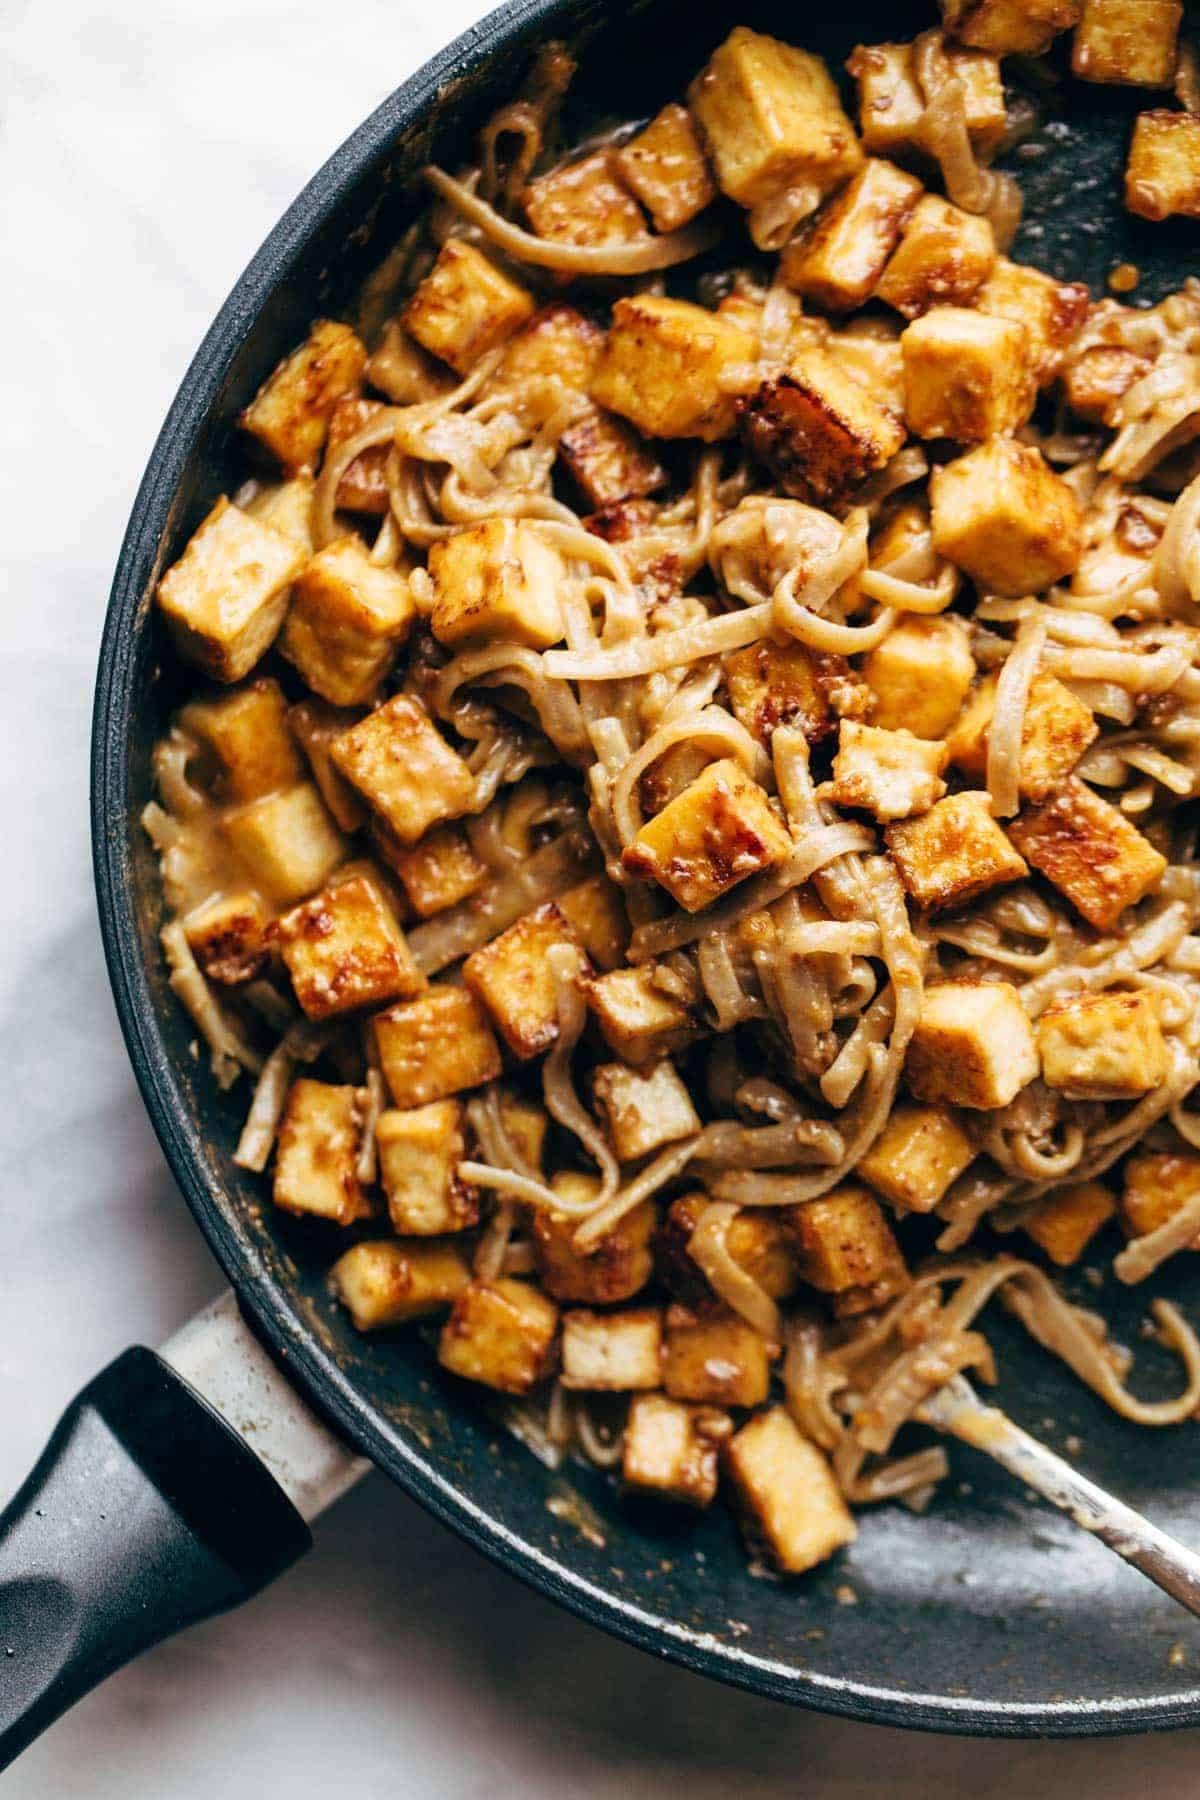 Fried tofu and brown rice noodles with sauce in pan.